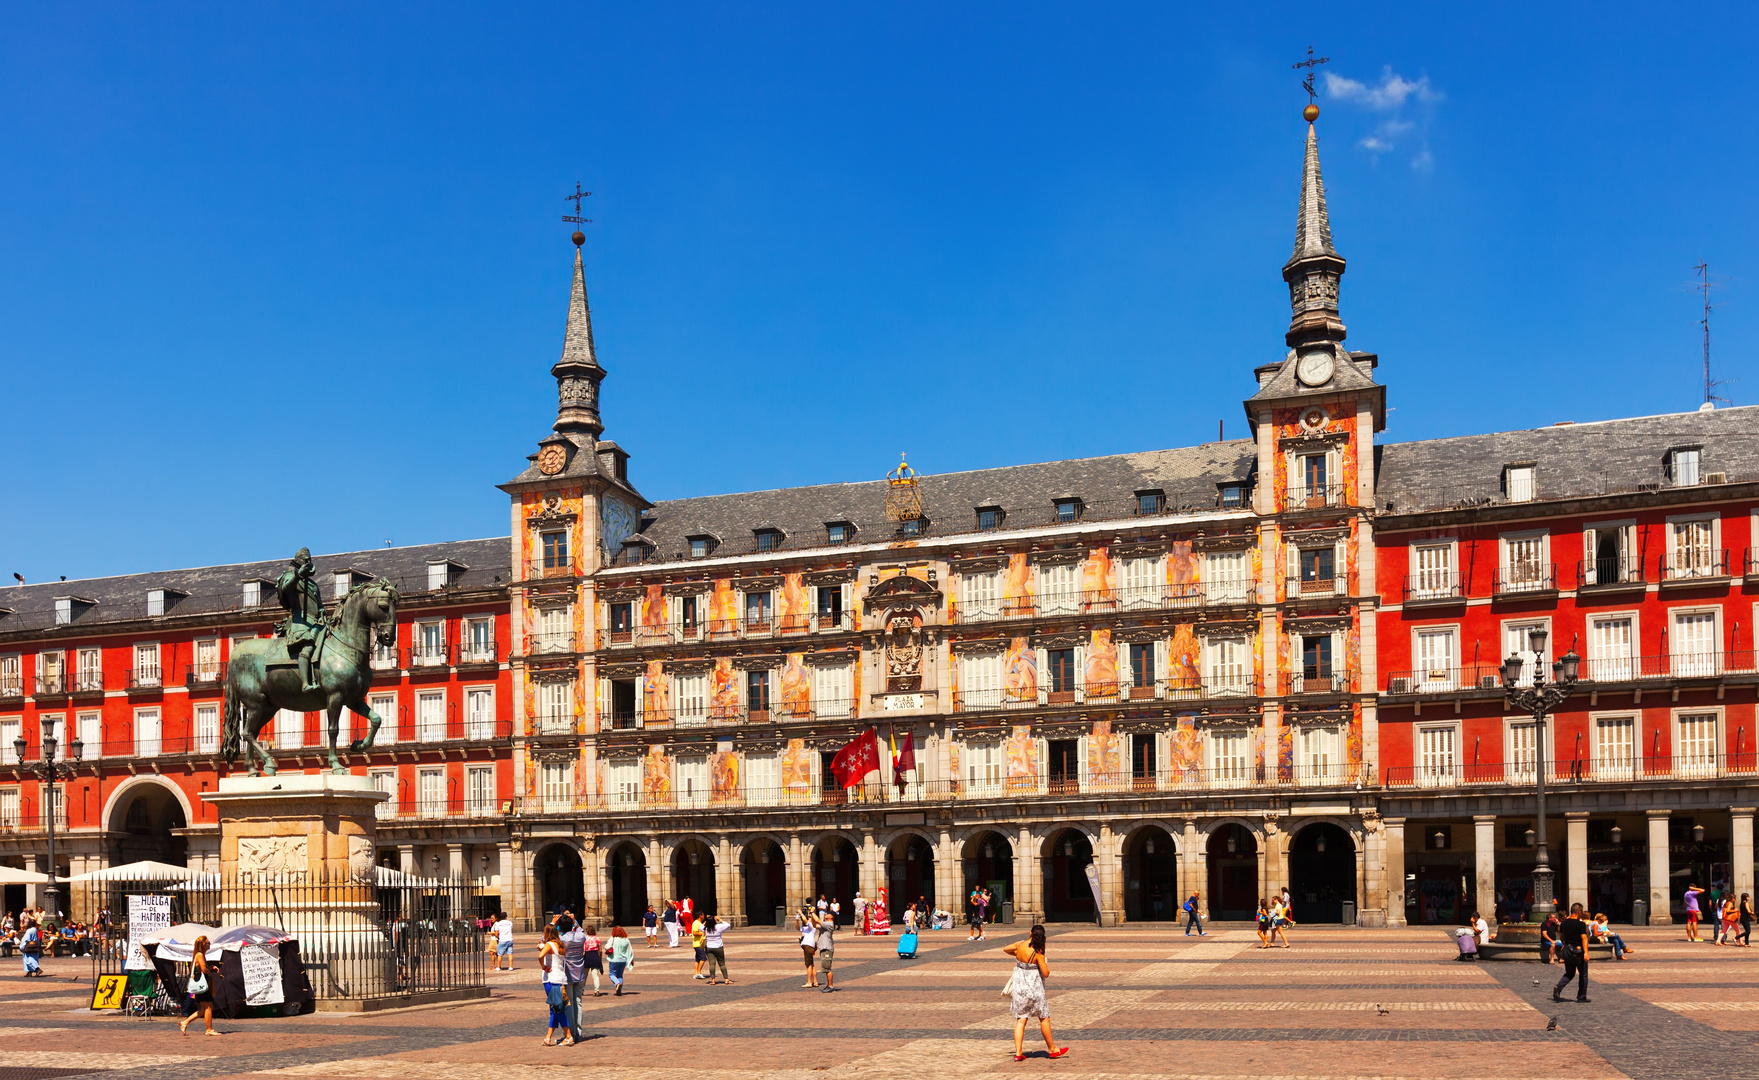 MADRID, SPAIN - AUGUST 29: Picturesque view of Plaza Mayor on August 29, 2013 in Madrid, Spain. It is old centre of capital city